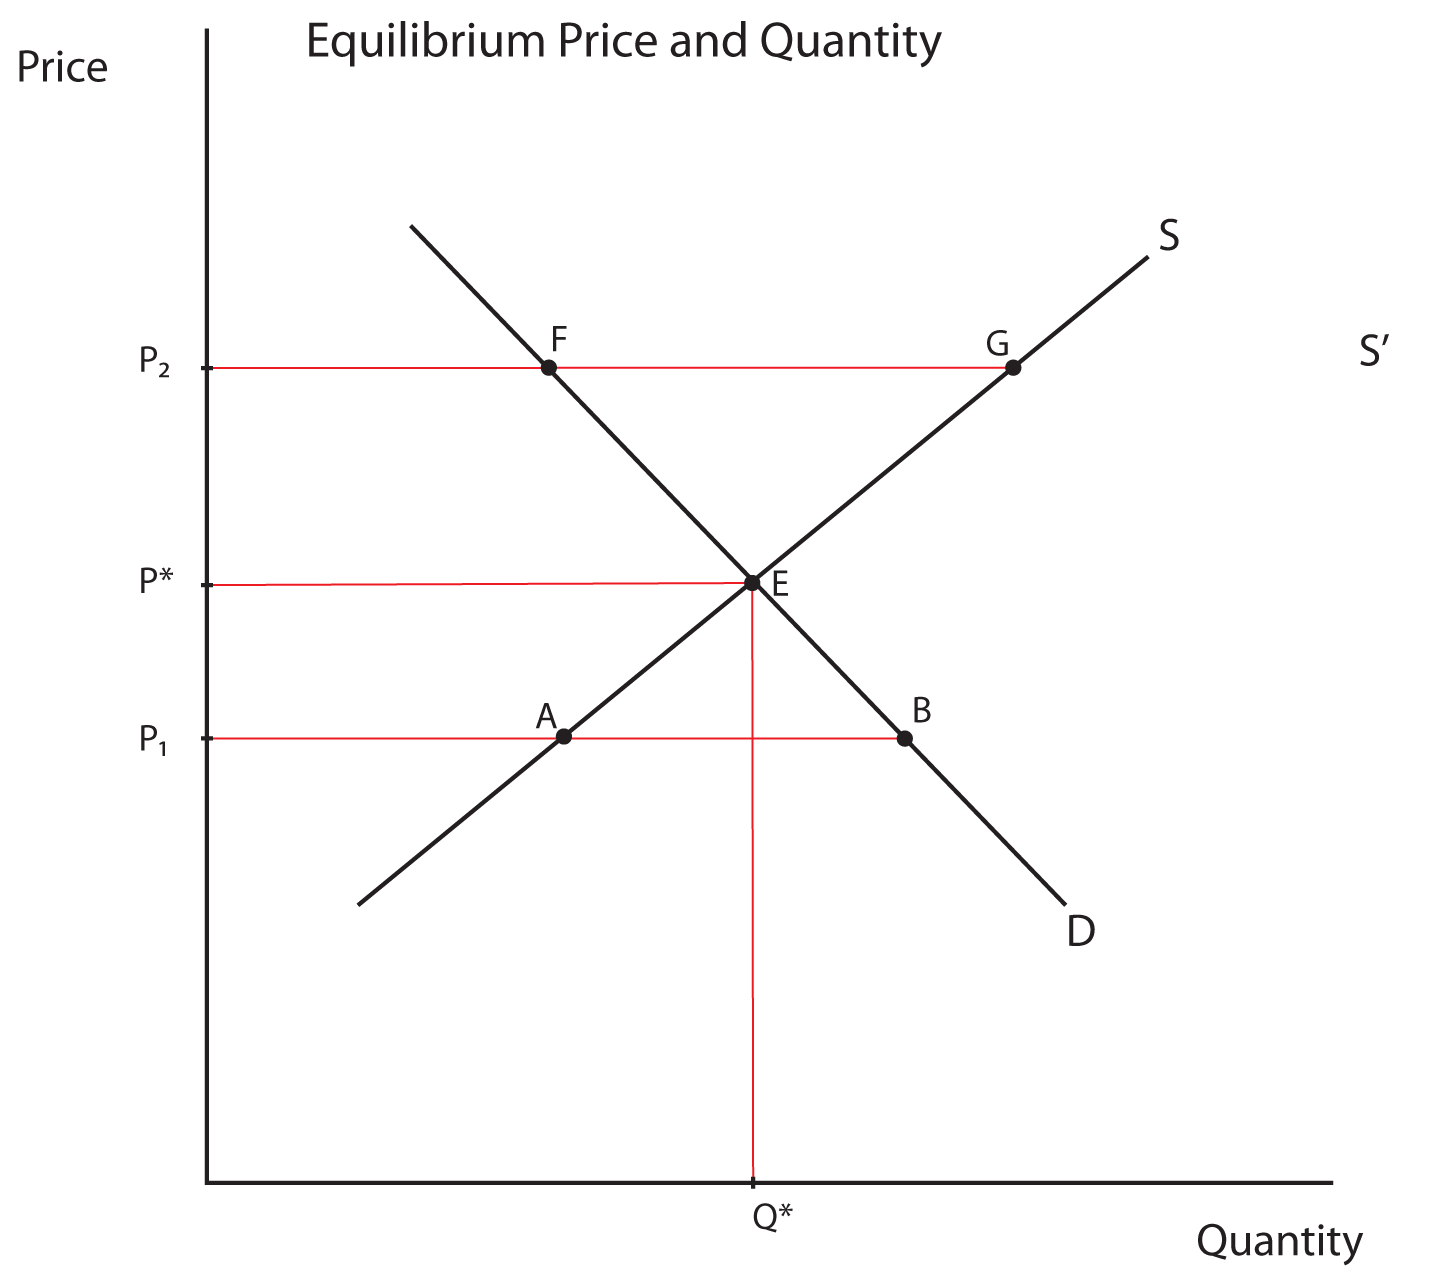 Description: Description: Image 1.12: Equilibrium Price and Quantity. This image shows a graph with Price on the Y axis and Quantity on the X axis.
Two 45 degree angle lines cross at a point labeled E.  Line D slopes downward from the Y axis to the X axis, and line S slopes upward away from the origin.  Point E is connected by a horizontal line to a point labeled P* on the Y axis and by a vertical line to a point labeled Q* on the X axis.  Another point on the Y axis, P1, is below point P*.  This point (P1) is connected by a horizontal line to a point labeled A on line S and a point labeled B on line D. Another point on the Y axis, P2, is above point P*.  This point (P2) is connected by a horizontal line to a point labeled F on line D and a point labeled G on line S.